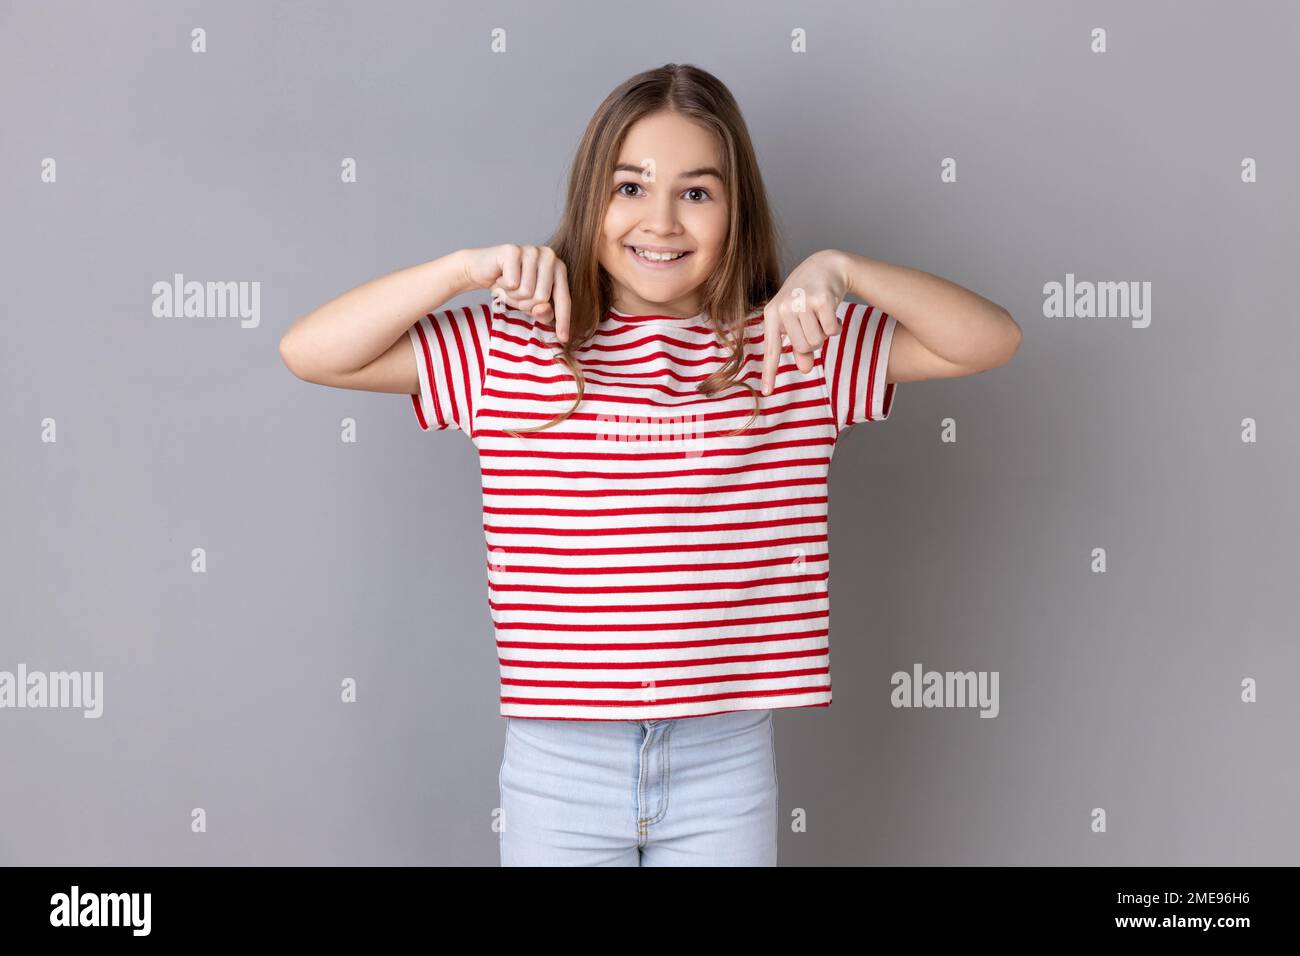 Look, advertise below. Portrait of little girl wearing striped T-shirt pointing down place for commercial idea, looking at camera with toothy smile. Indoor studio shot isolated on gray background. Stock Photo